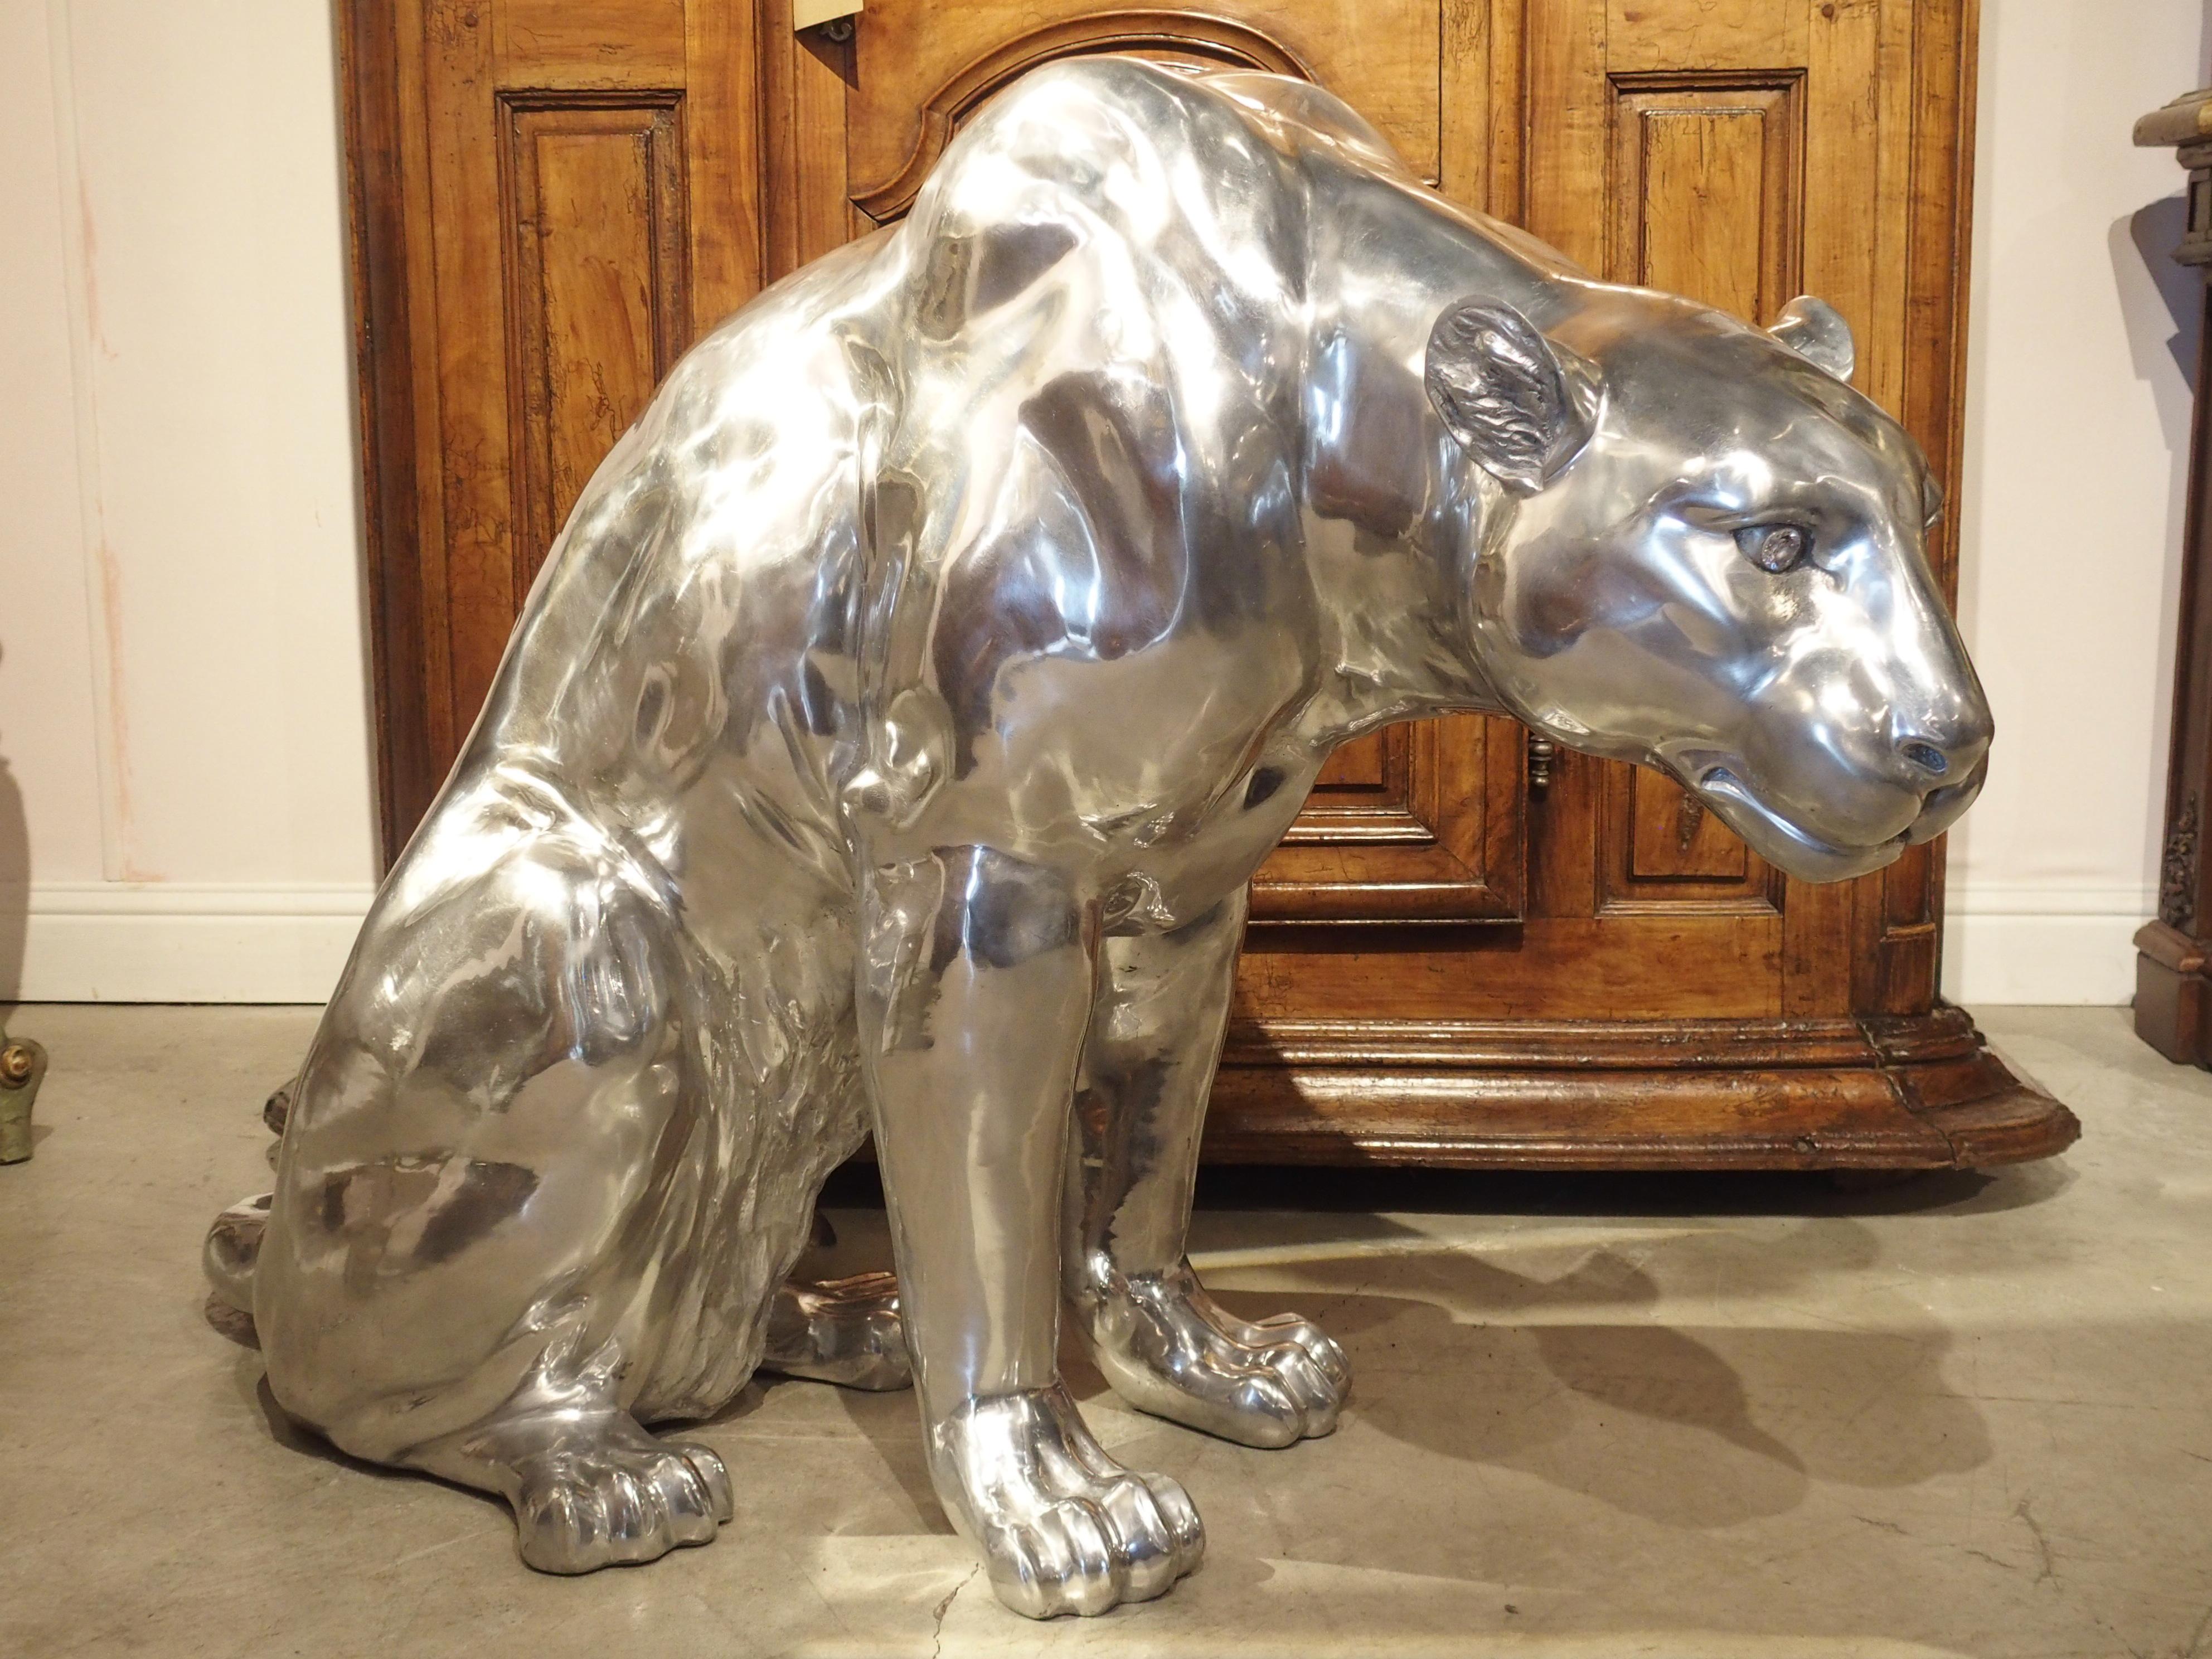 20th Century Life-Sized Aluminum Panther by French Sculptor Christian Maas